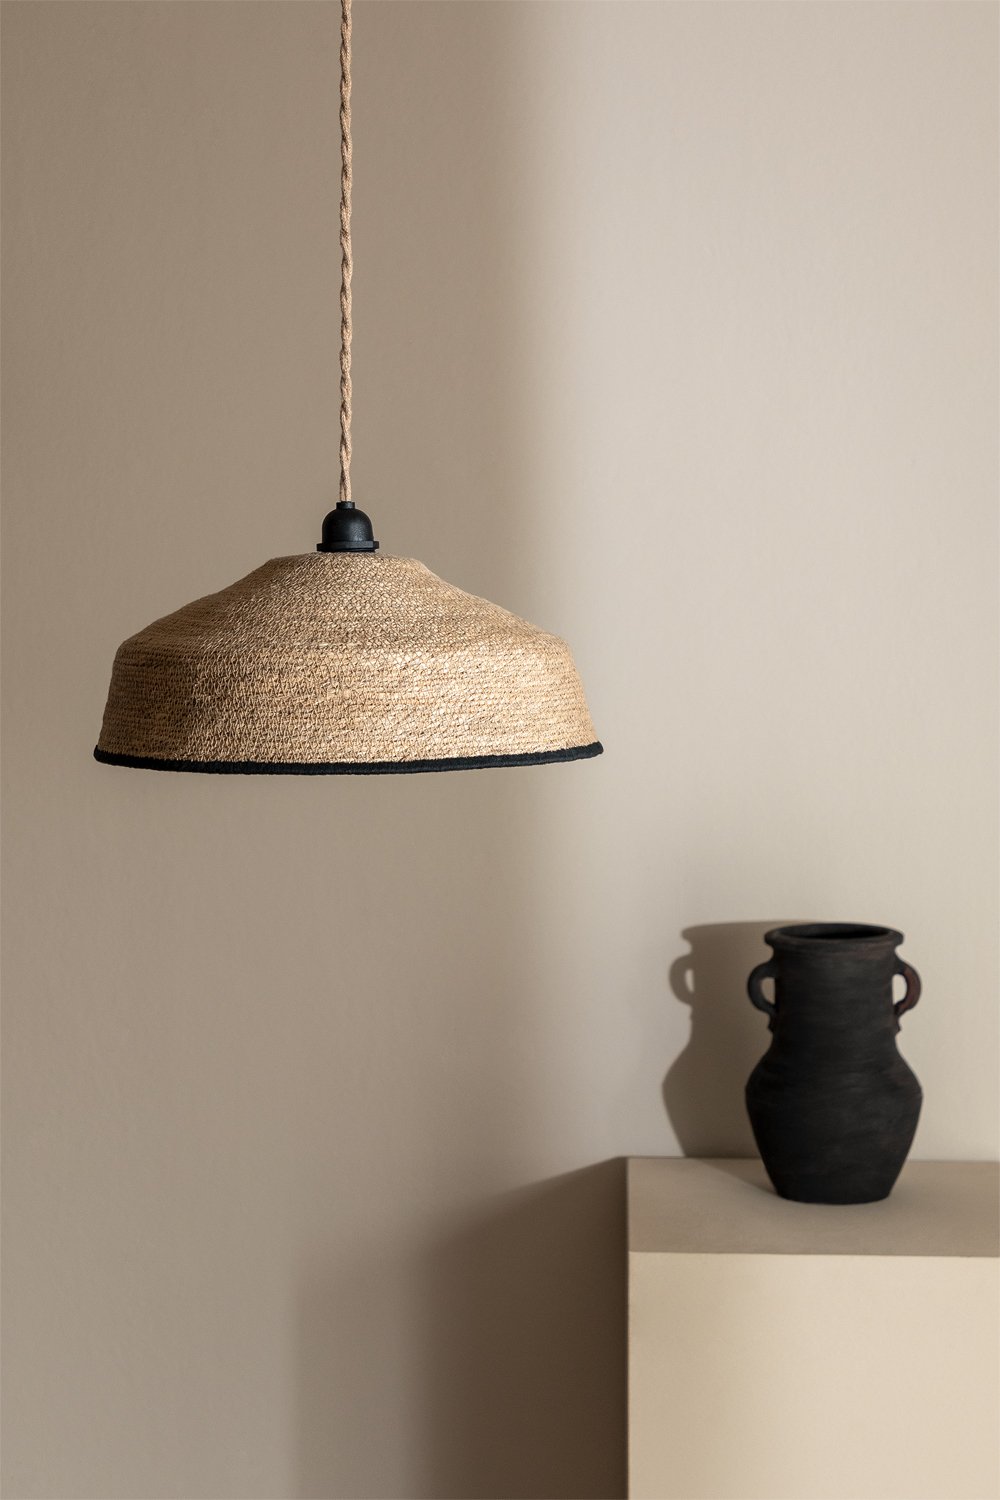 Lampshade for the Coraline Lamp, gallery image 1